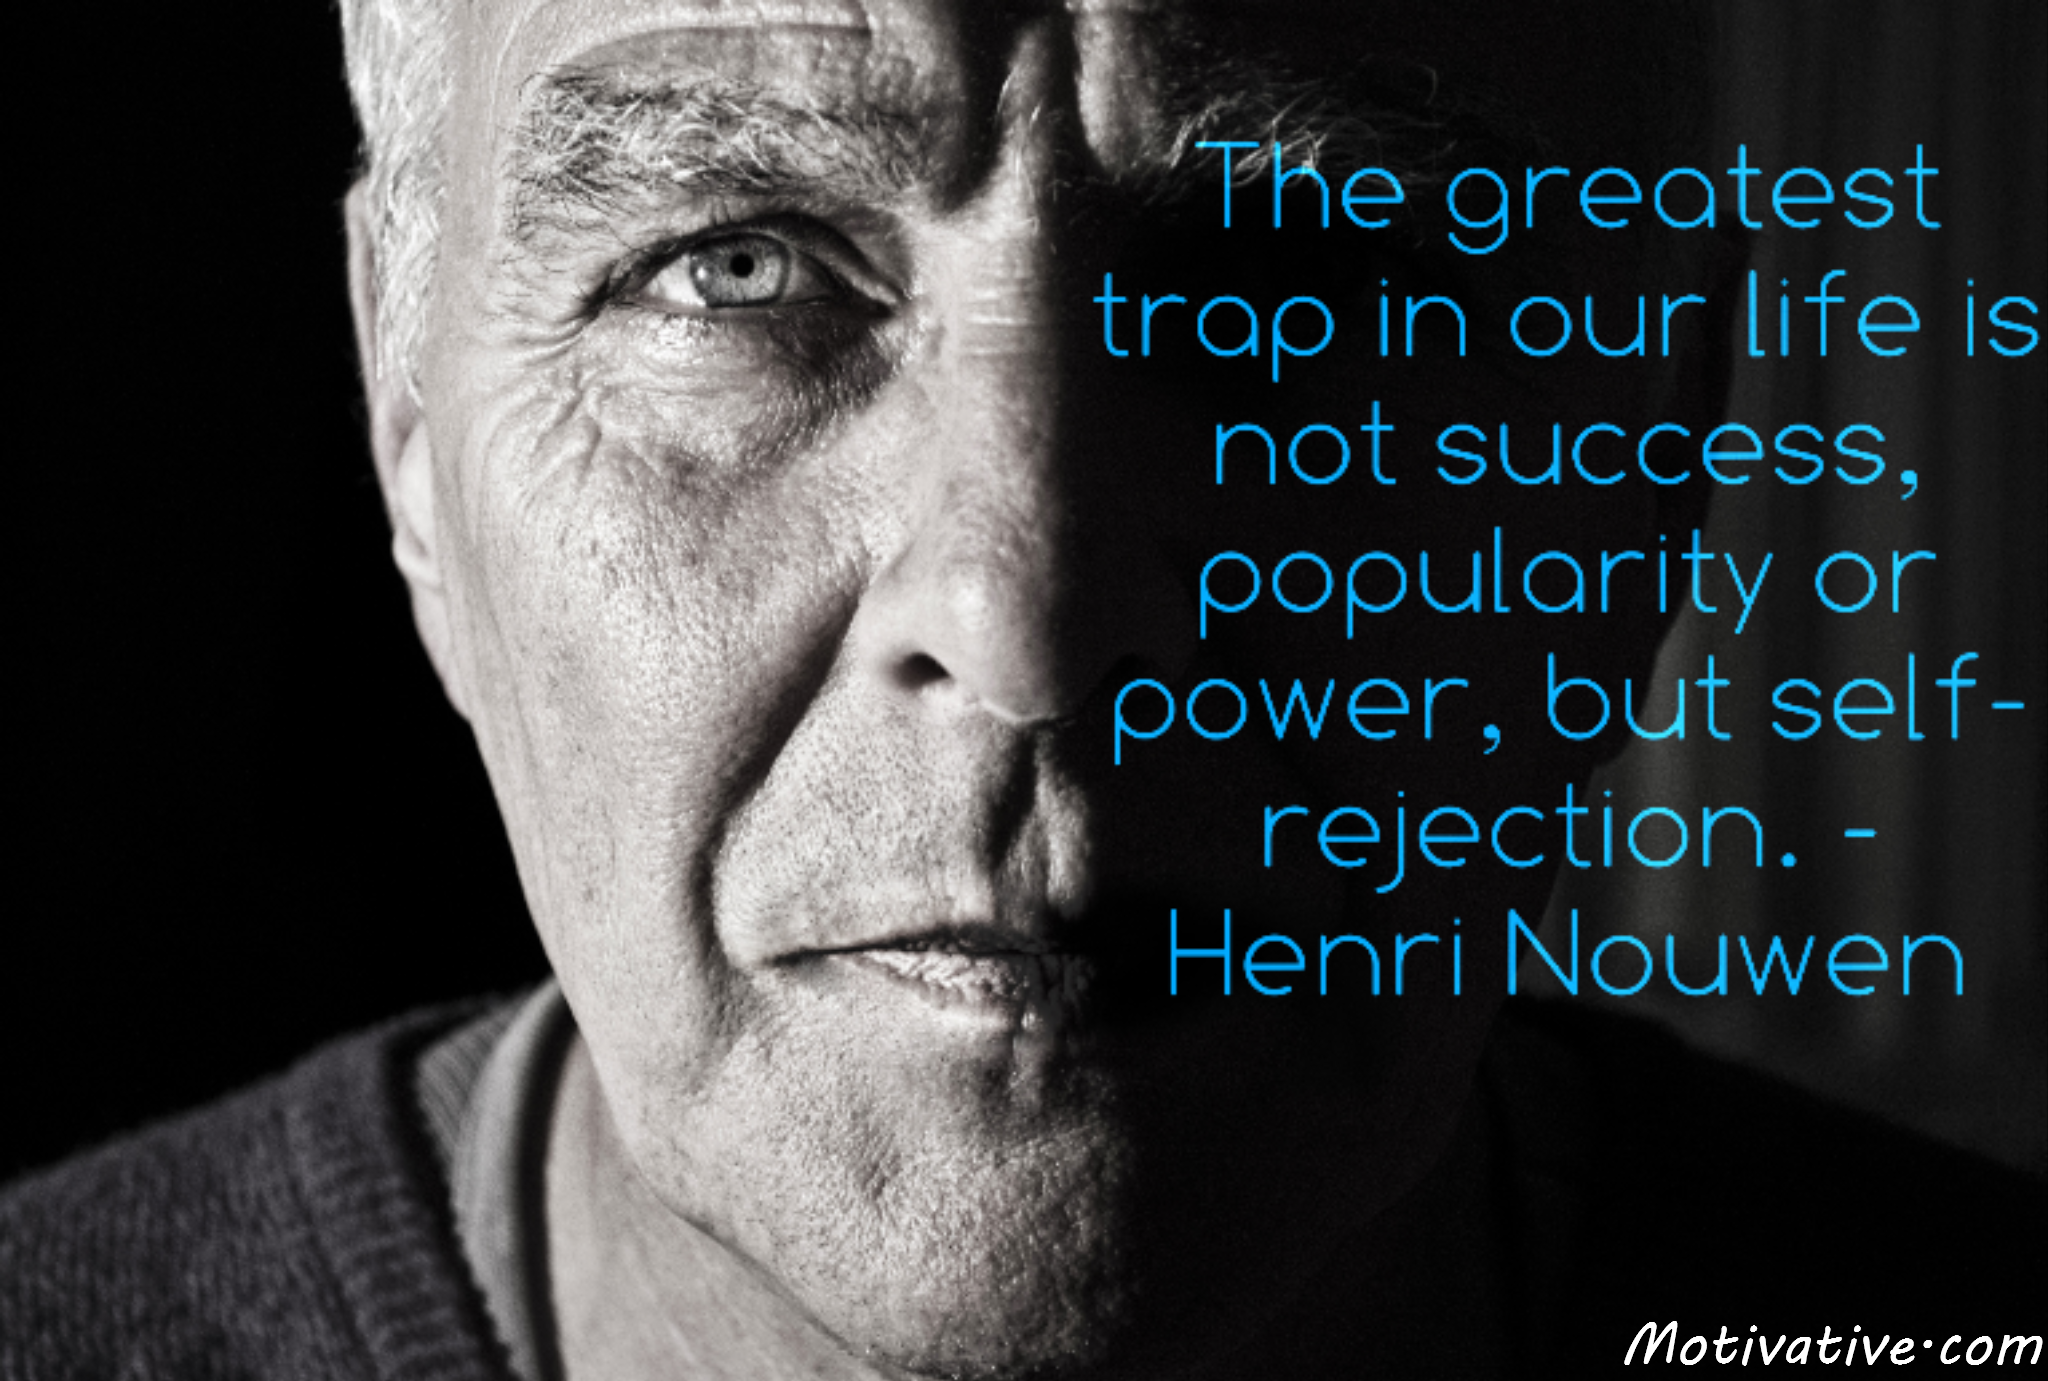 The greatest trap in our life is not success, popularity or power, but self-rejection. – Henri Nouwen